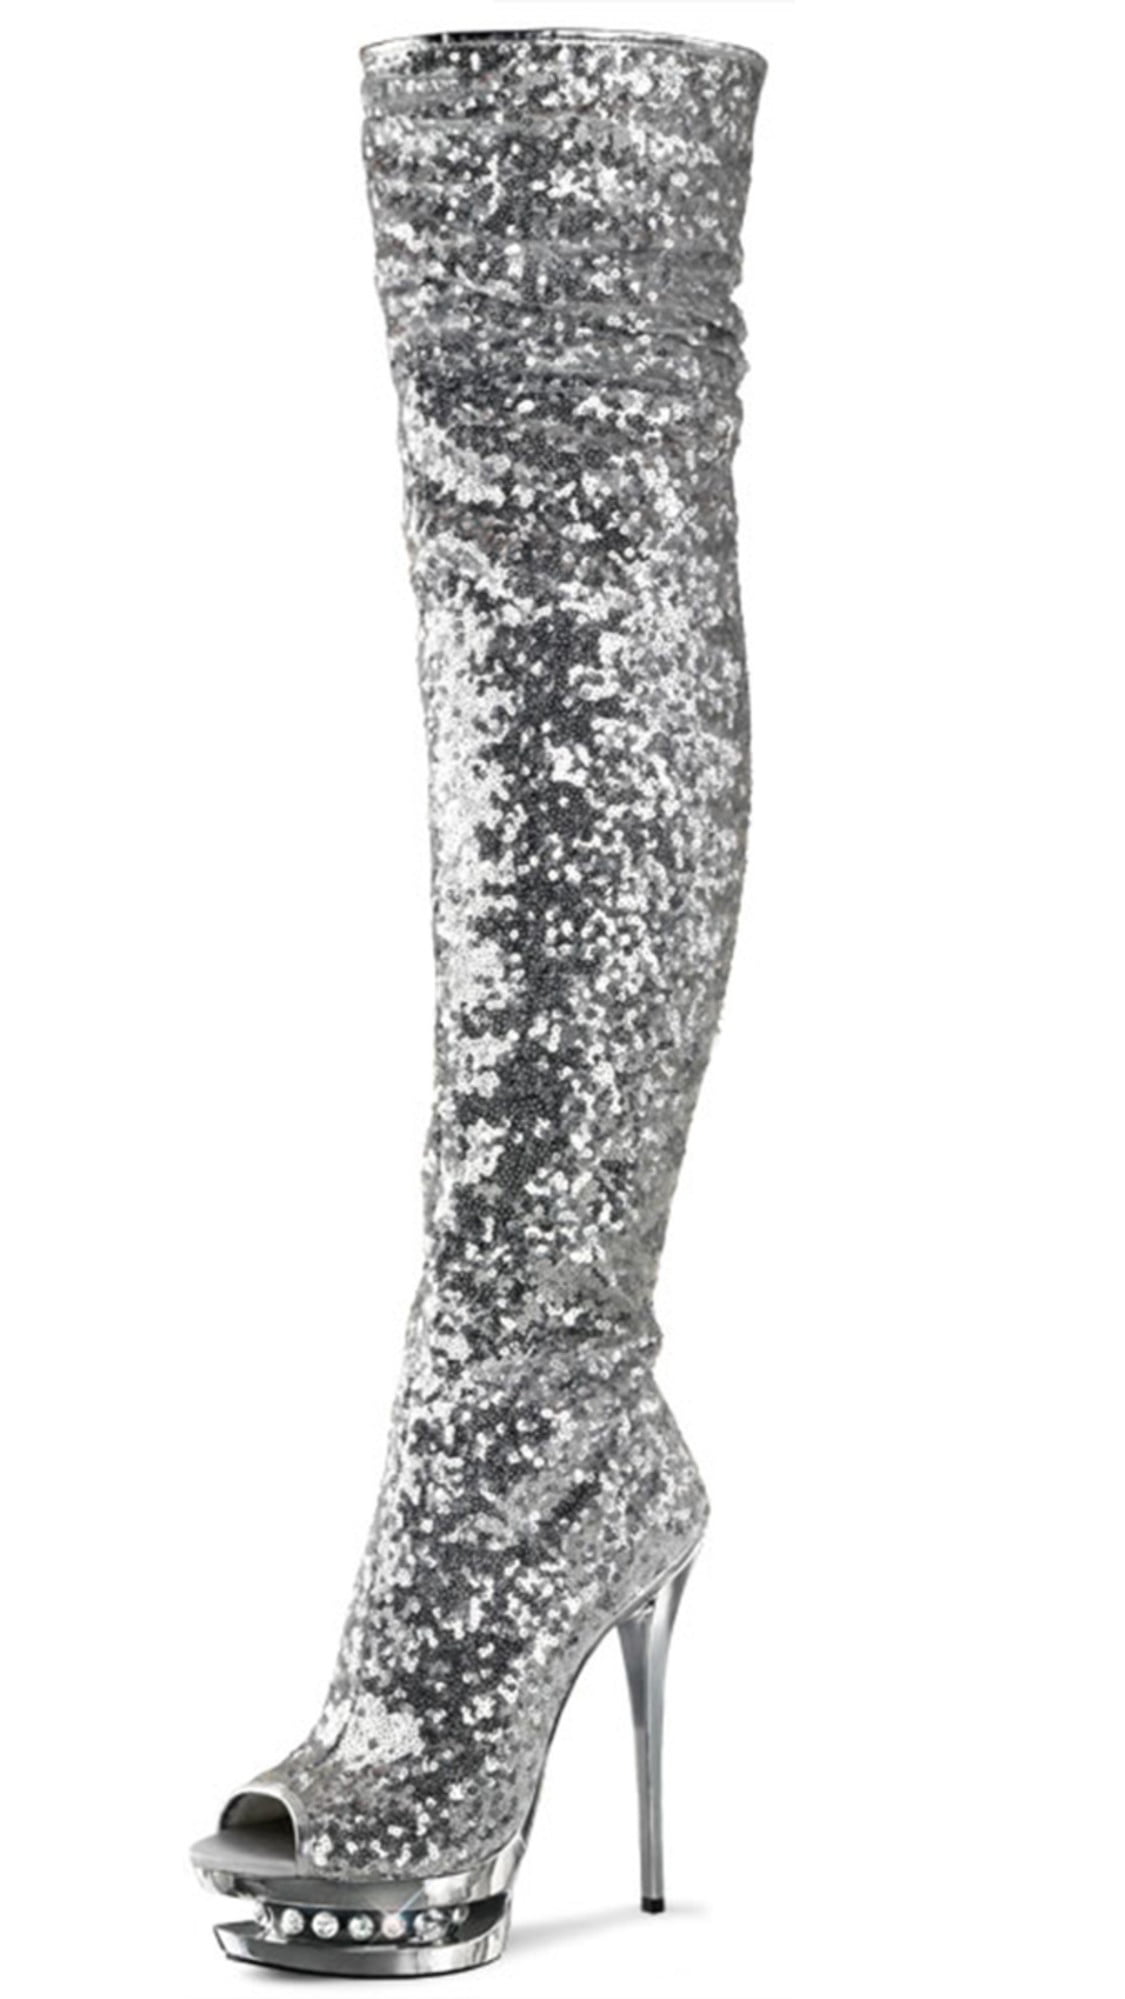 Pleaser - Fabulous Thigh High Silver Sequin Boots with Silver Chrome ...